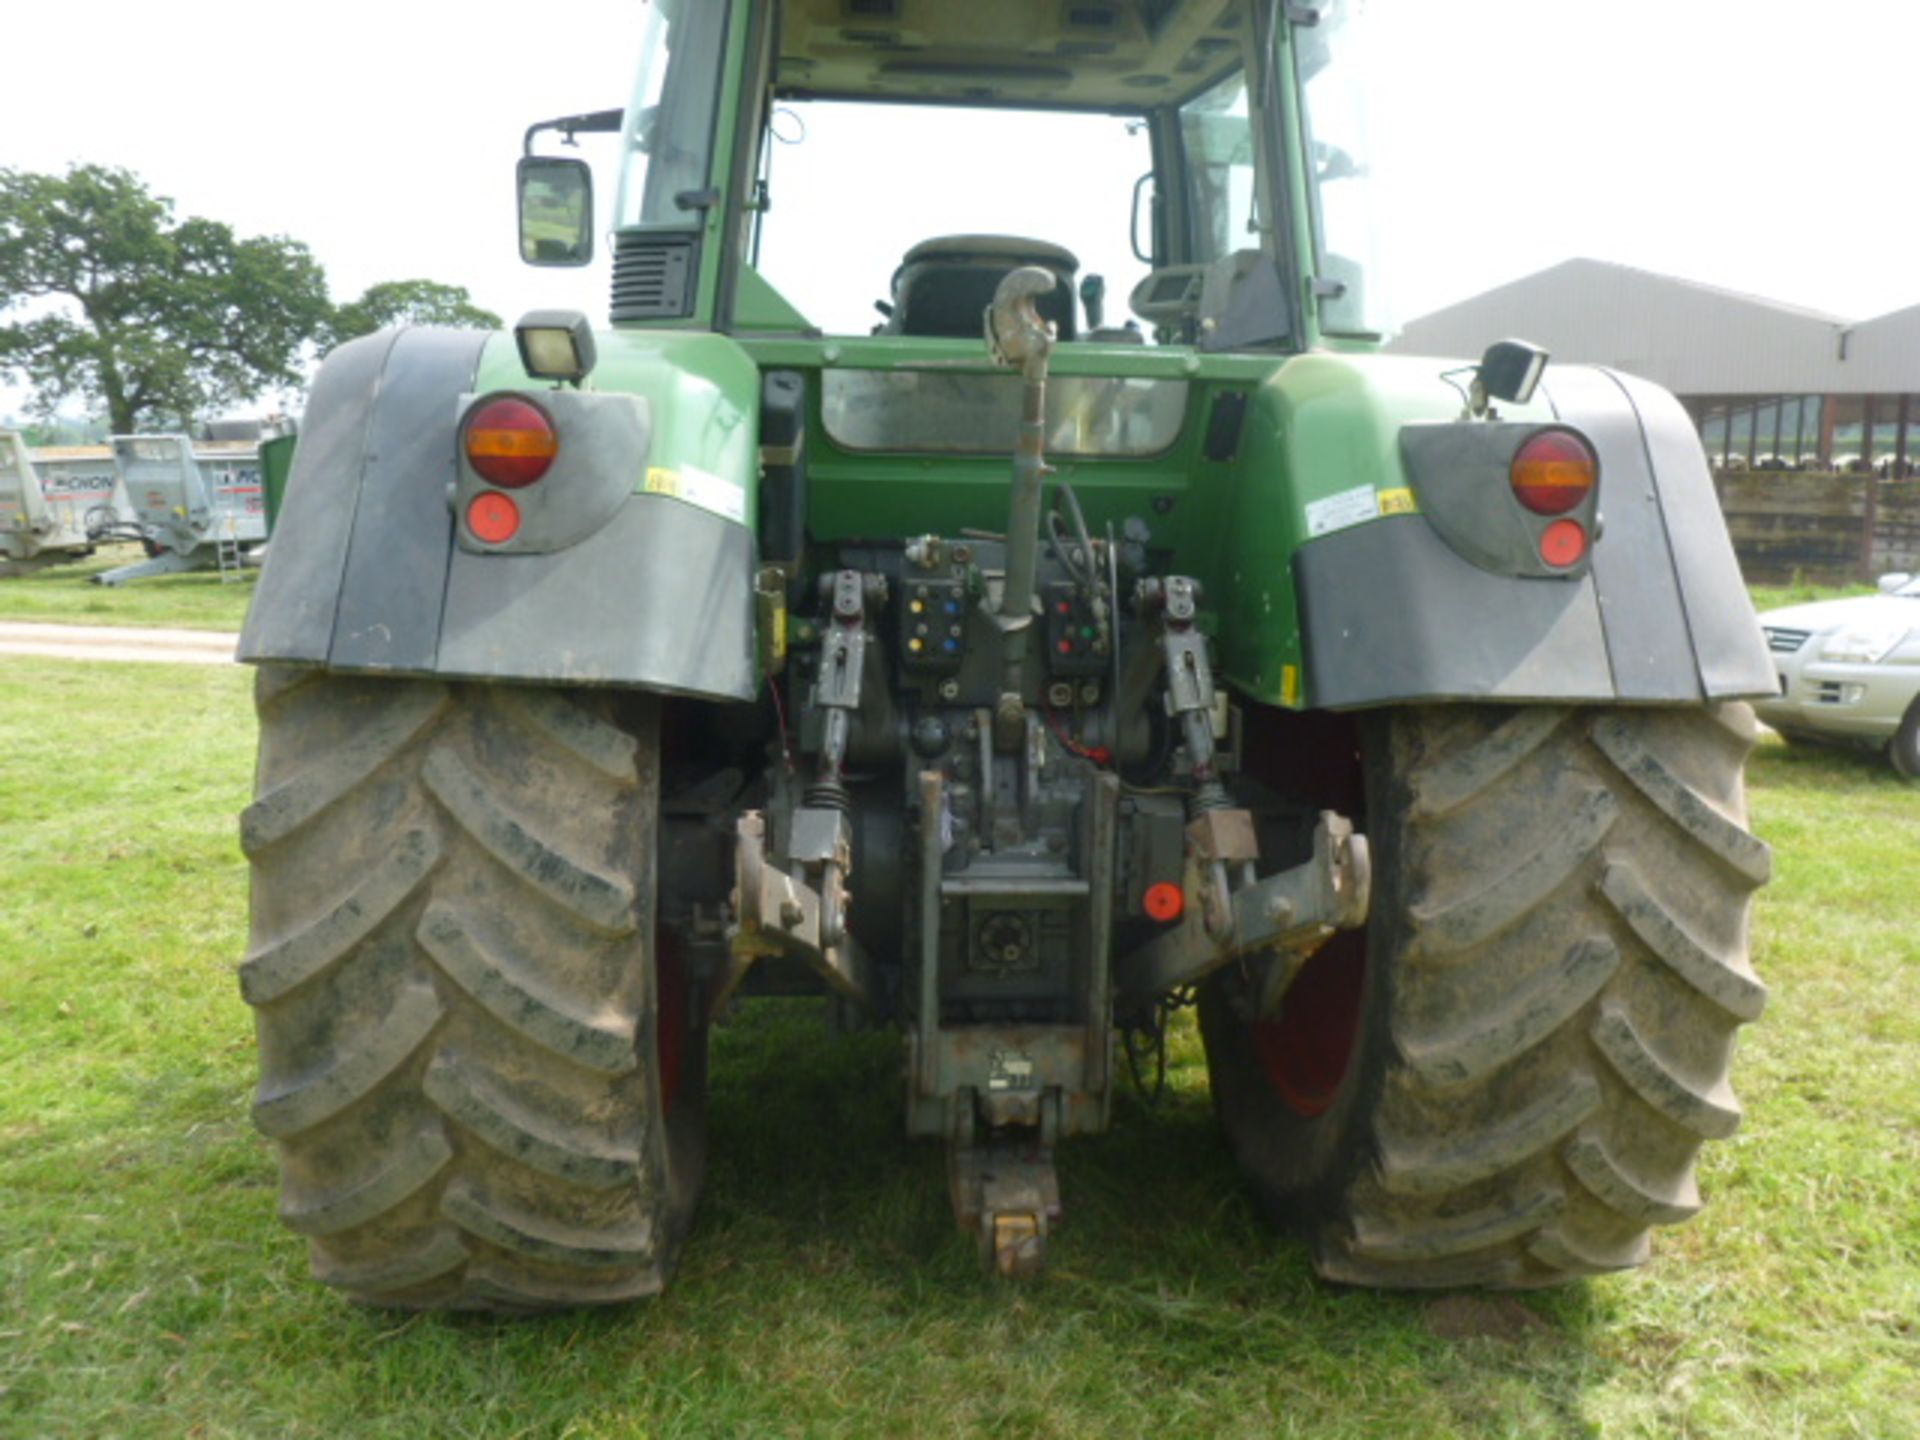 FENDT 718 VARIO TMS TRACTOR (7305)HOURS C/W FRONT WEIGHT 1260KG REG DX08 NHN ONE OWNER FROM NEW - Image 3 of 10